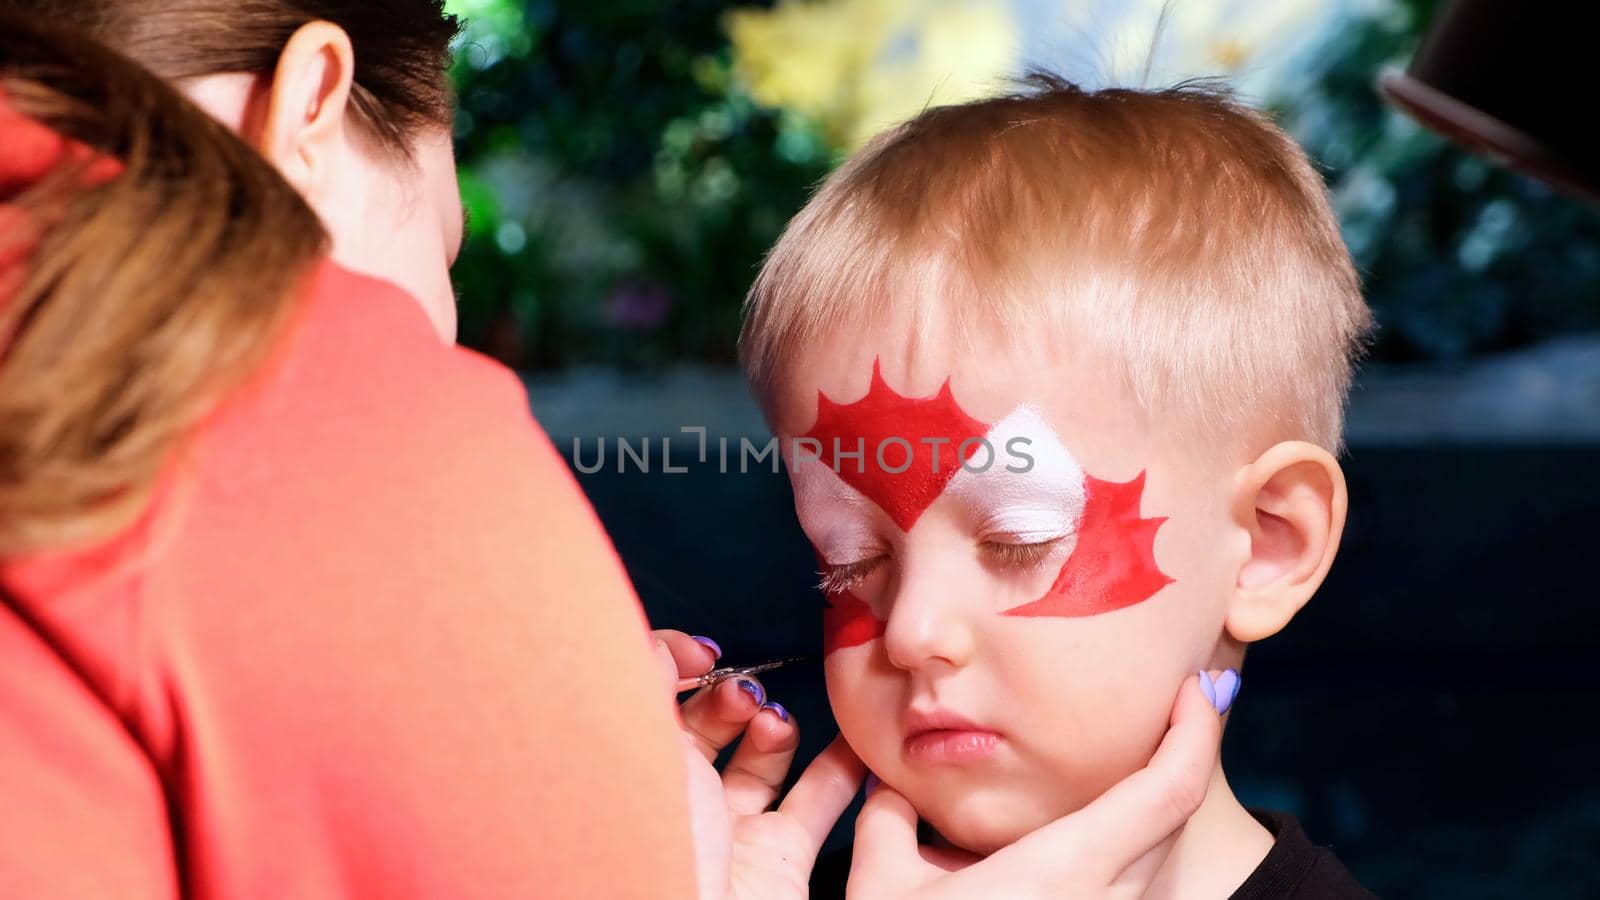 A little boy is put face painting on his face, his face is painted with paint. The concept of children's holiday, childhood, entertainment event, Halloween.